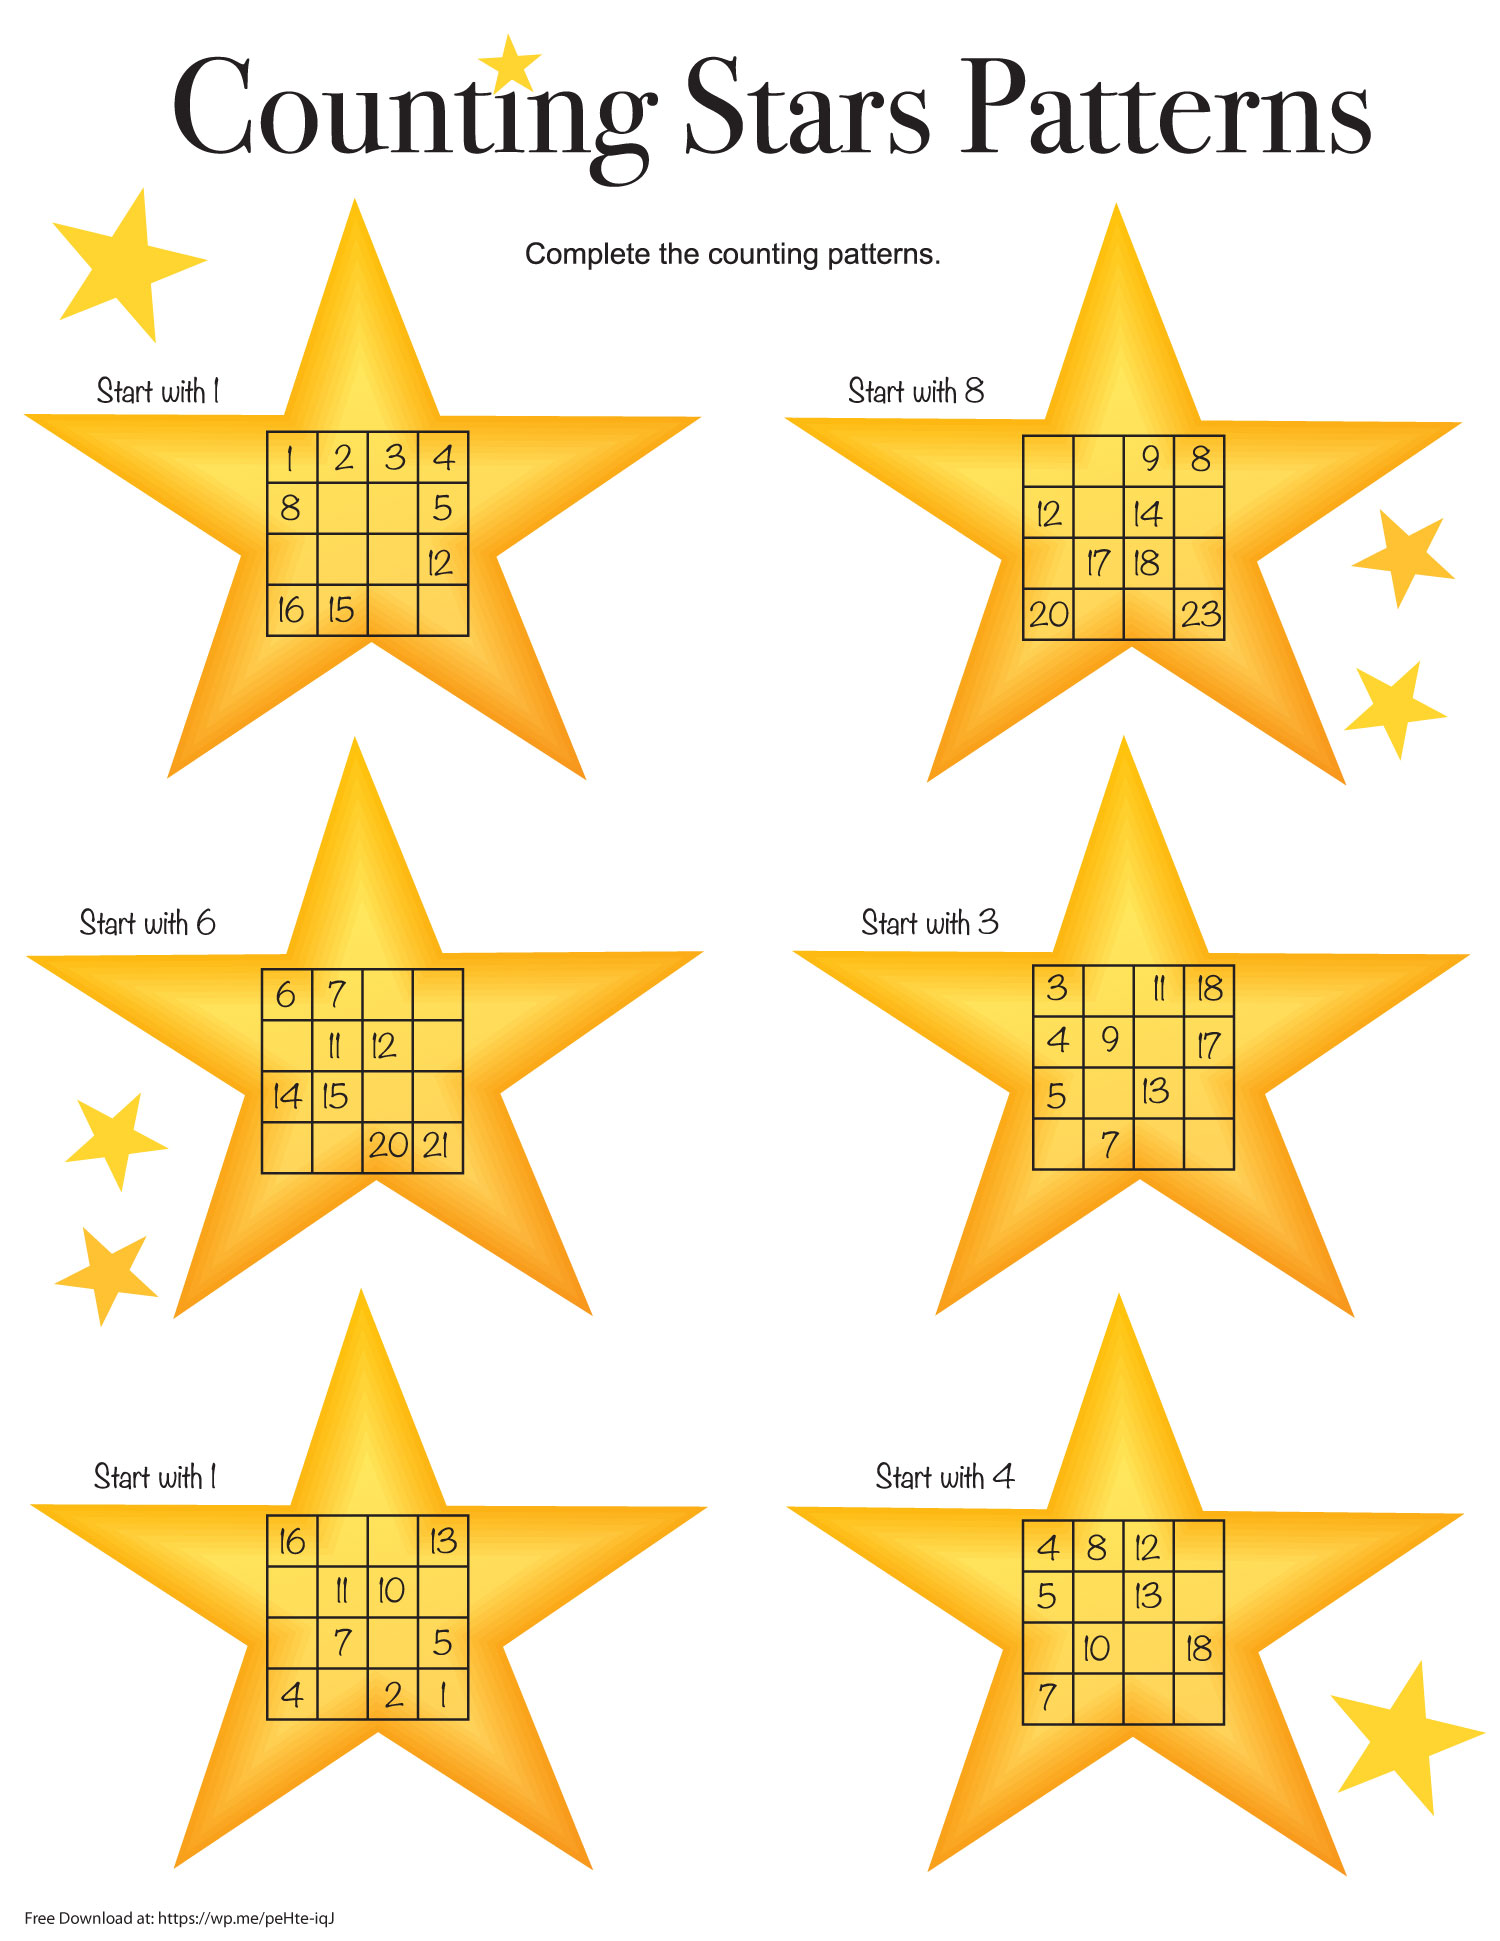 Counting Stars Patterns Printable - Here is a free math printable for your children to print out and do. #CountingPrintable